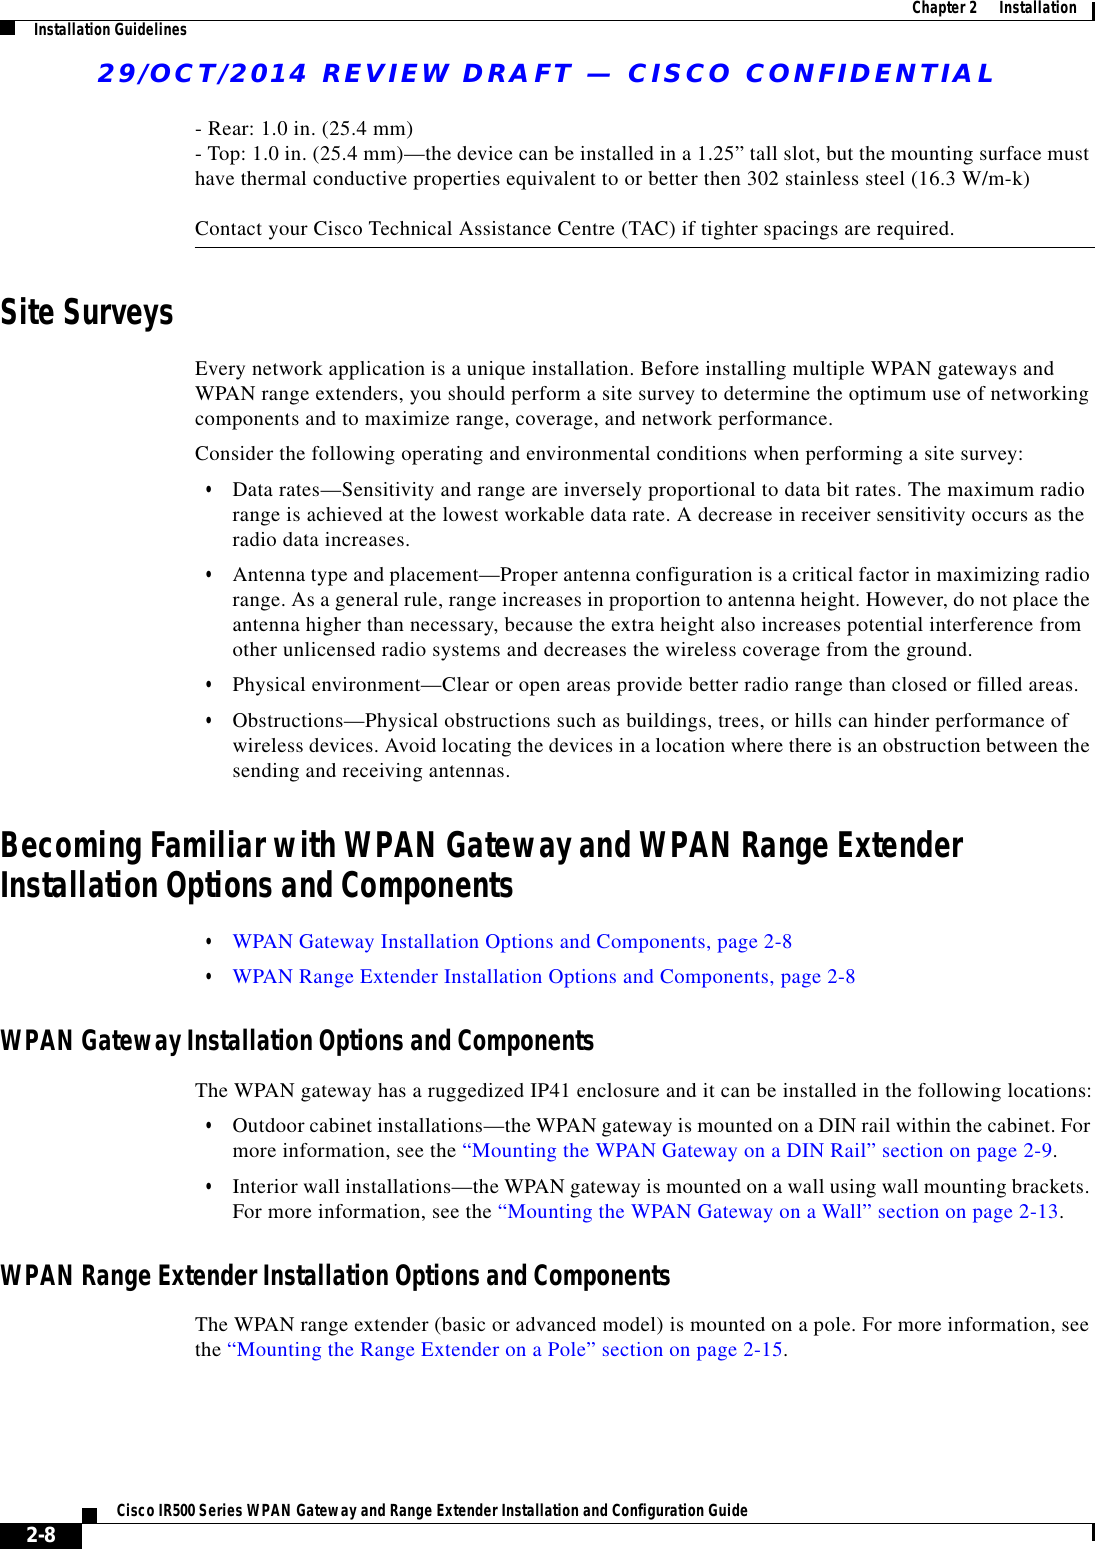 29/OCT/2014 REVIEW DRAFT — CISCO CONFIDENTIAL2-8Cisco IR500 Series WPAN Gateway and Range Extender Installation and Configuration Guide  Chapter 2      Installation Installation Guidelines- Rear: 1.0 in. (25.4 mm) - Top: 1.0 in. (25.4 mm)—the device can be installed in a 1.25” tall slot, but the mounting surface must have thermal conductive properties equivalent to or better then 302 stainless steel (16.3 W/m-k)  Contact your Cisco Technical Assistance Centre (TAC) if tighter spacings are required.Site SurveysEvery network application is a unique installation. Before installing multiple WPAN gateways and WPAN range extenders, you should perform a site survey to determine the optimum use of networking components and to maximize range, coverage, and network performance.Consider the following operating and environmental conditions when performing a site survey:  • Data rates—Sensitivity and range are inversely proportional to data bit rates. The maximum radio range is achieved at the lowest workable data rate. A decrease in receiver sensitivity occurs as the radio data increases.  • Antenna type and placement—Proper antenna configuration is a critical factor in maximizing radio range. As a general rule, range increases in proportion to antenna height. However, do not place the antenna higher than necessary, because the extra height also increases potential interference from other unlicensed radio systems and decreases the wireless coverage from the ground.  • Physical environment—Clear or open areas provide better radio range than closed or filled areas.  • Obstructions—Physical obstructions such as buildings, trees, or hills can hinder performance of wireless devices. Avoid locating the devices in a location where there is an obstruction between the sending and receiving antennas.Becoming Familiar with WPAN Gateway and WPAN Range Extender Installation Options and Components  • WPAN Gateway Installation Options and Components, page 2-8  • WPAN Range Extender Installation Options and Components, page 2-8WPAN Gateway Installation Options and ComponentsThe WPAN gateway has a ruggedized IP41 enclosure and it can be installed in the following locations:  • Outdoor cabinet installations—the WPAN gateway is mounted on a DIN rail within the cabinet. For more information, see the “Mounting the WPAN Gateway on a DIN Rail” section on page 2-9.  • Interior wall installations—the WPAN gateway is mounted on a wall using wall mounting brackets. For more information, see the “Mounting the WPAN Gateway on a Wall” section on page 2-13.WPAN Range Extender Installation Options and ComponentsThe WPAN range extender (basic or advanced model) is mounted on a pole. For more information, see the “Mounting the Range Extender on a Pole” section on page 2-15.